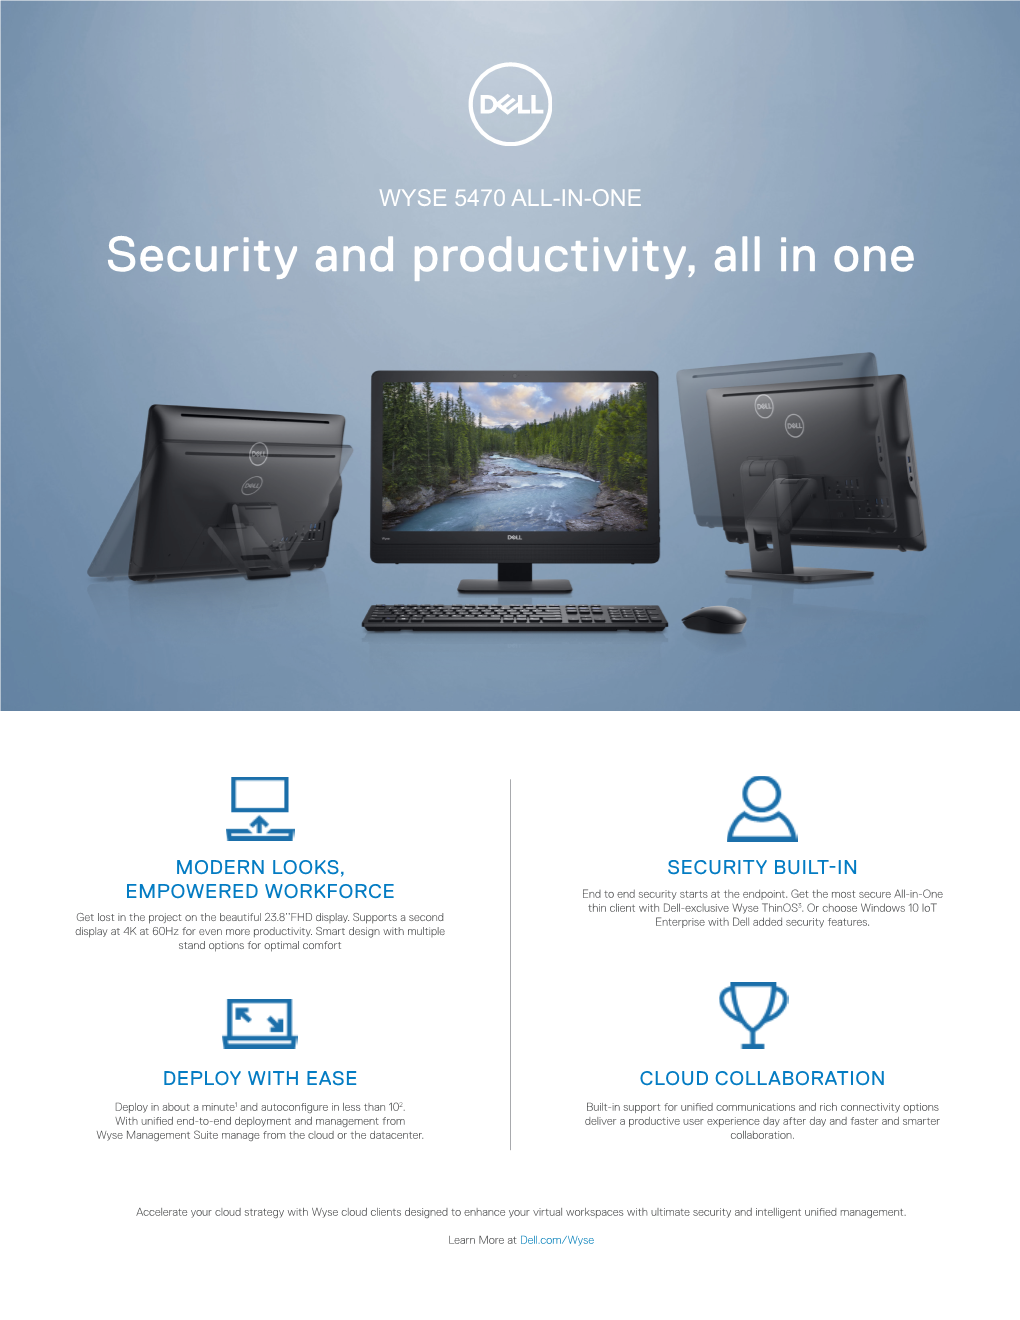 Security and Productivity, All in One